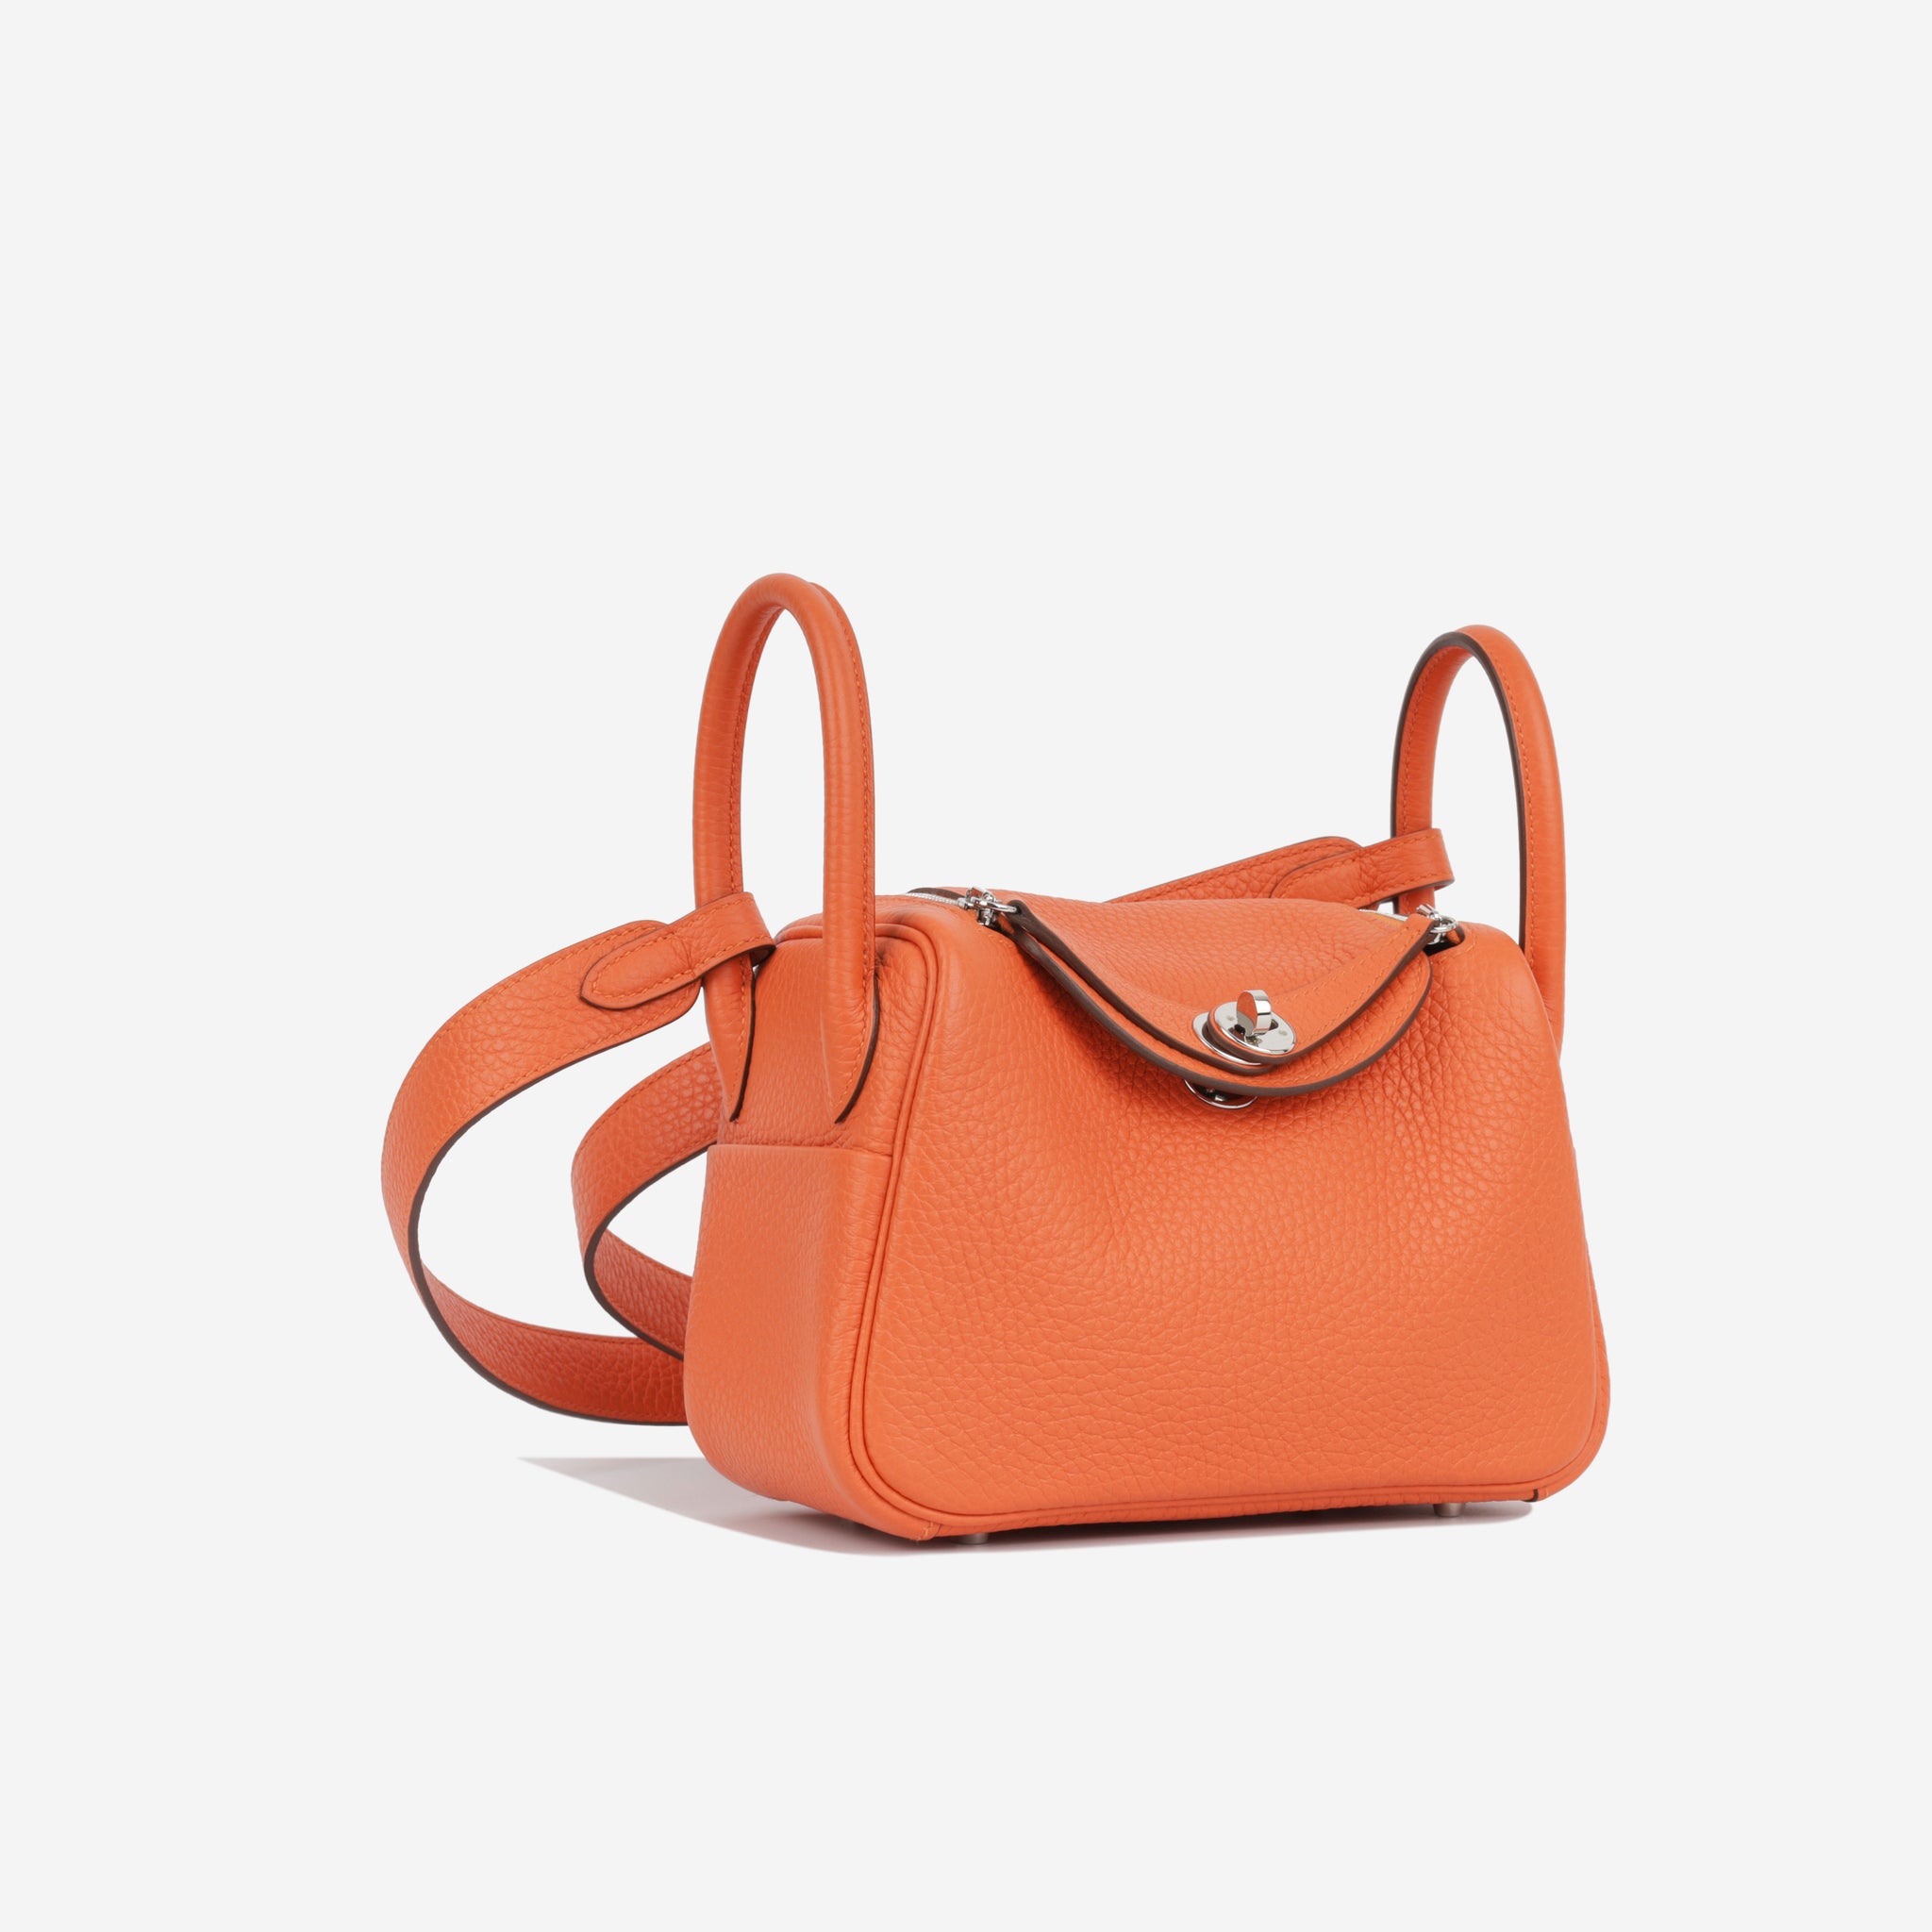 What's in my Hermes Lindy 26, Bag Review + Price